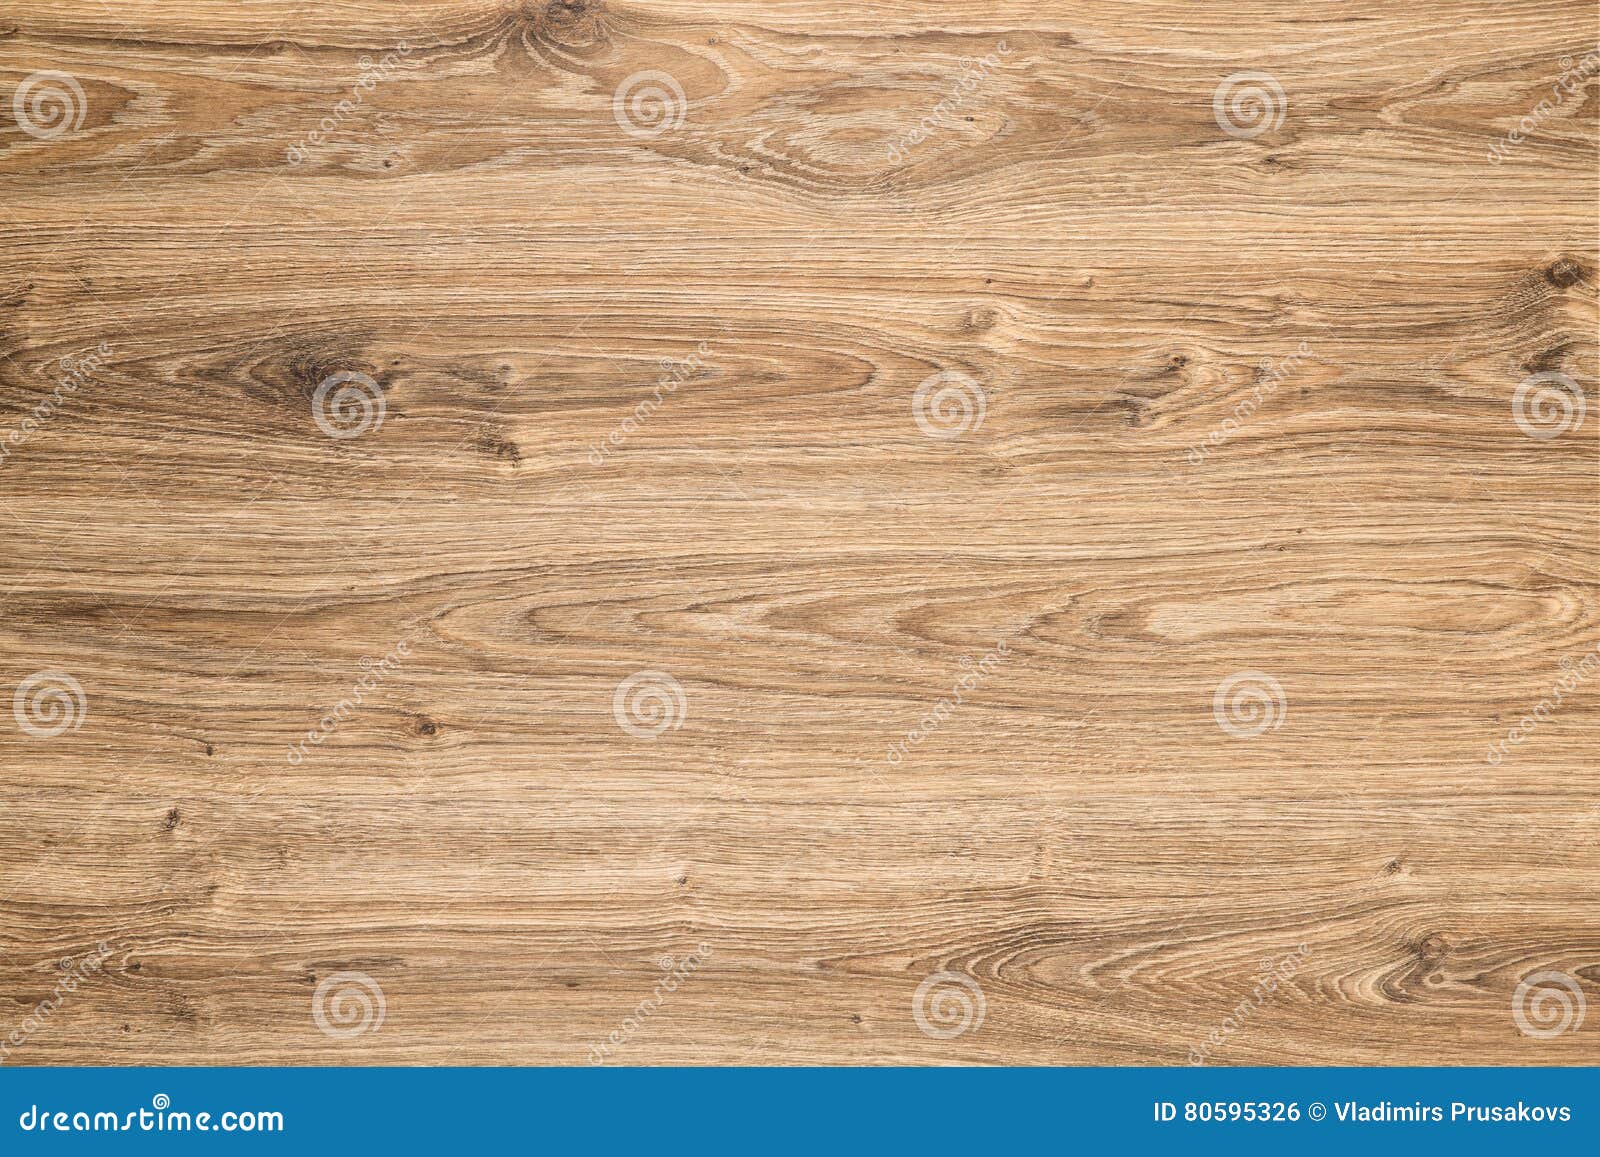 wood texture background, brown grained wooden pattern oak timber